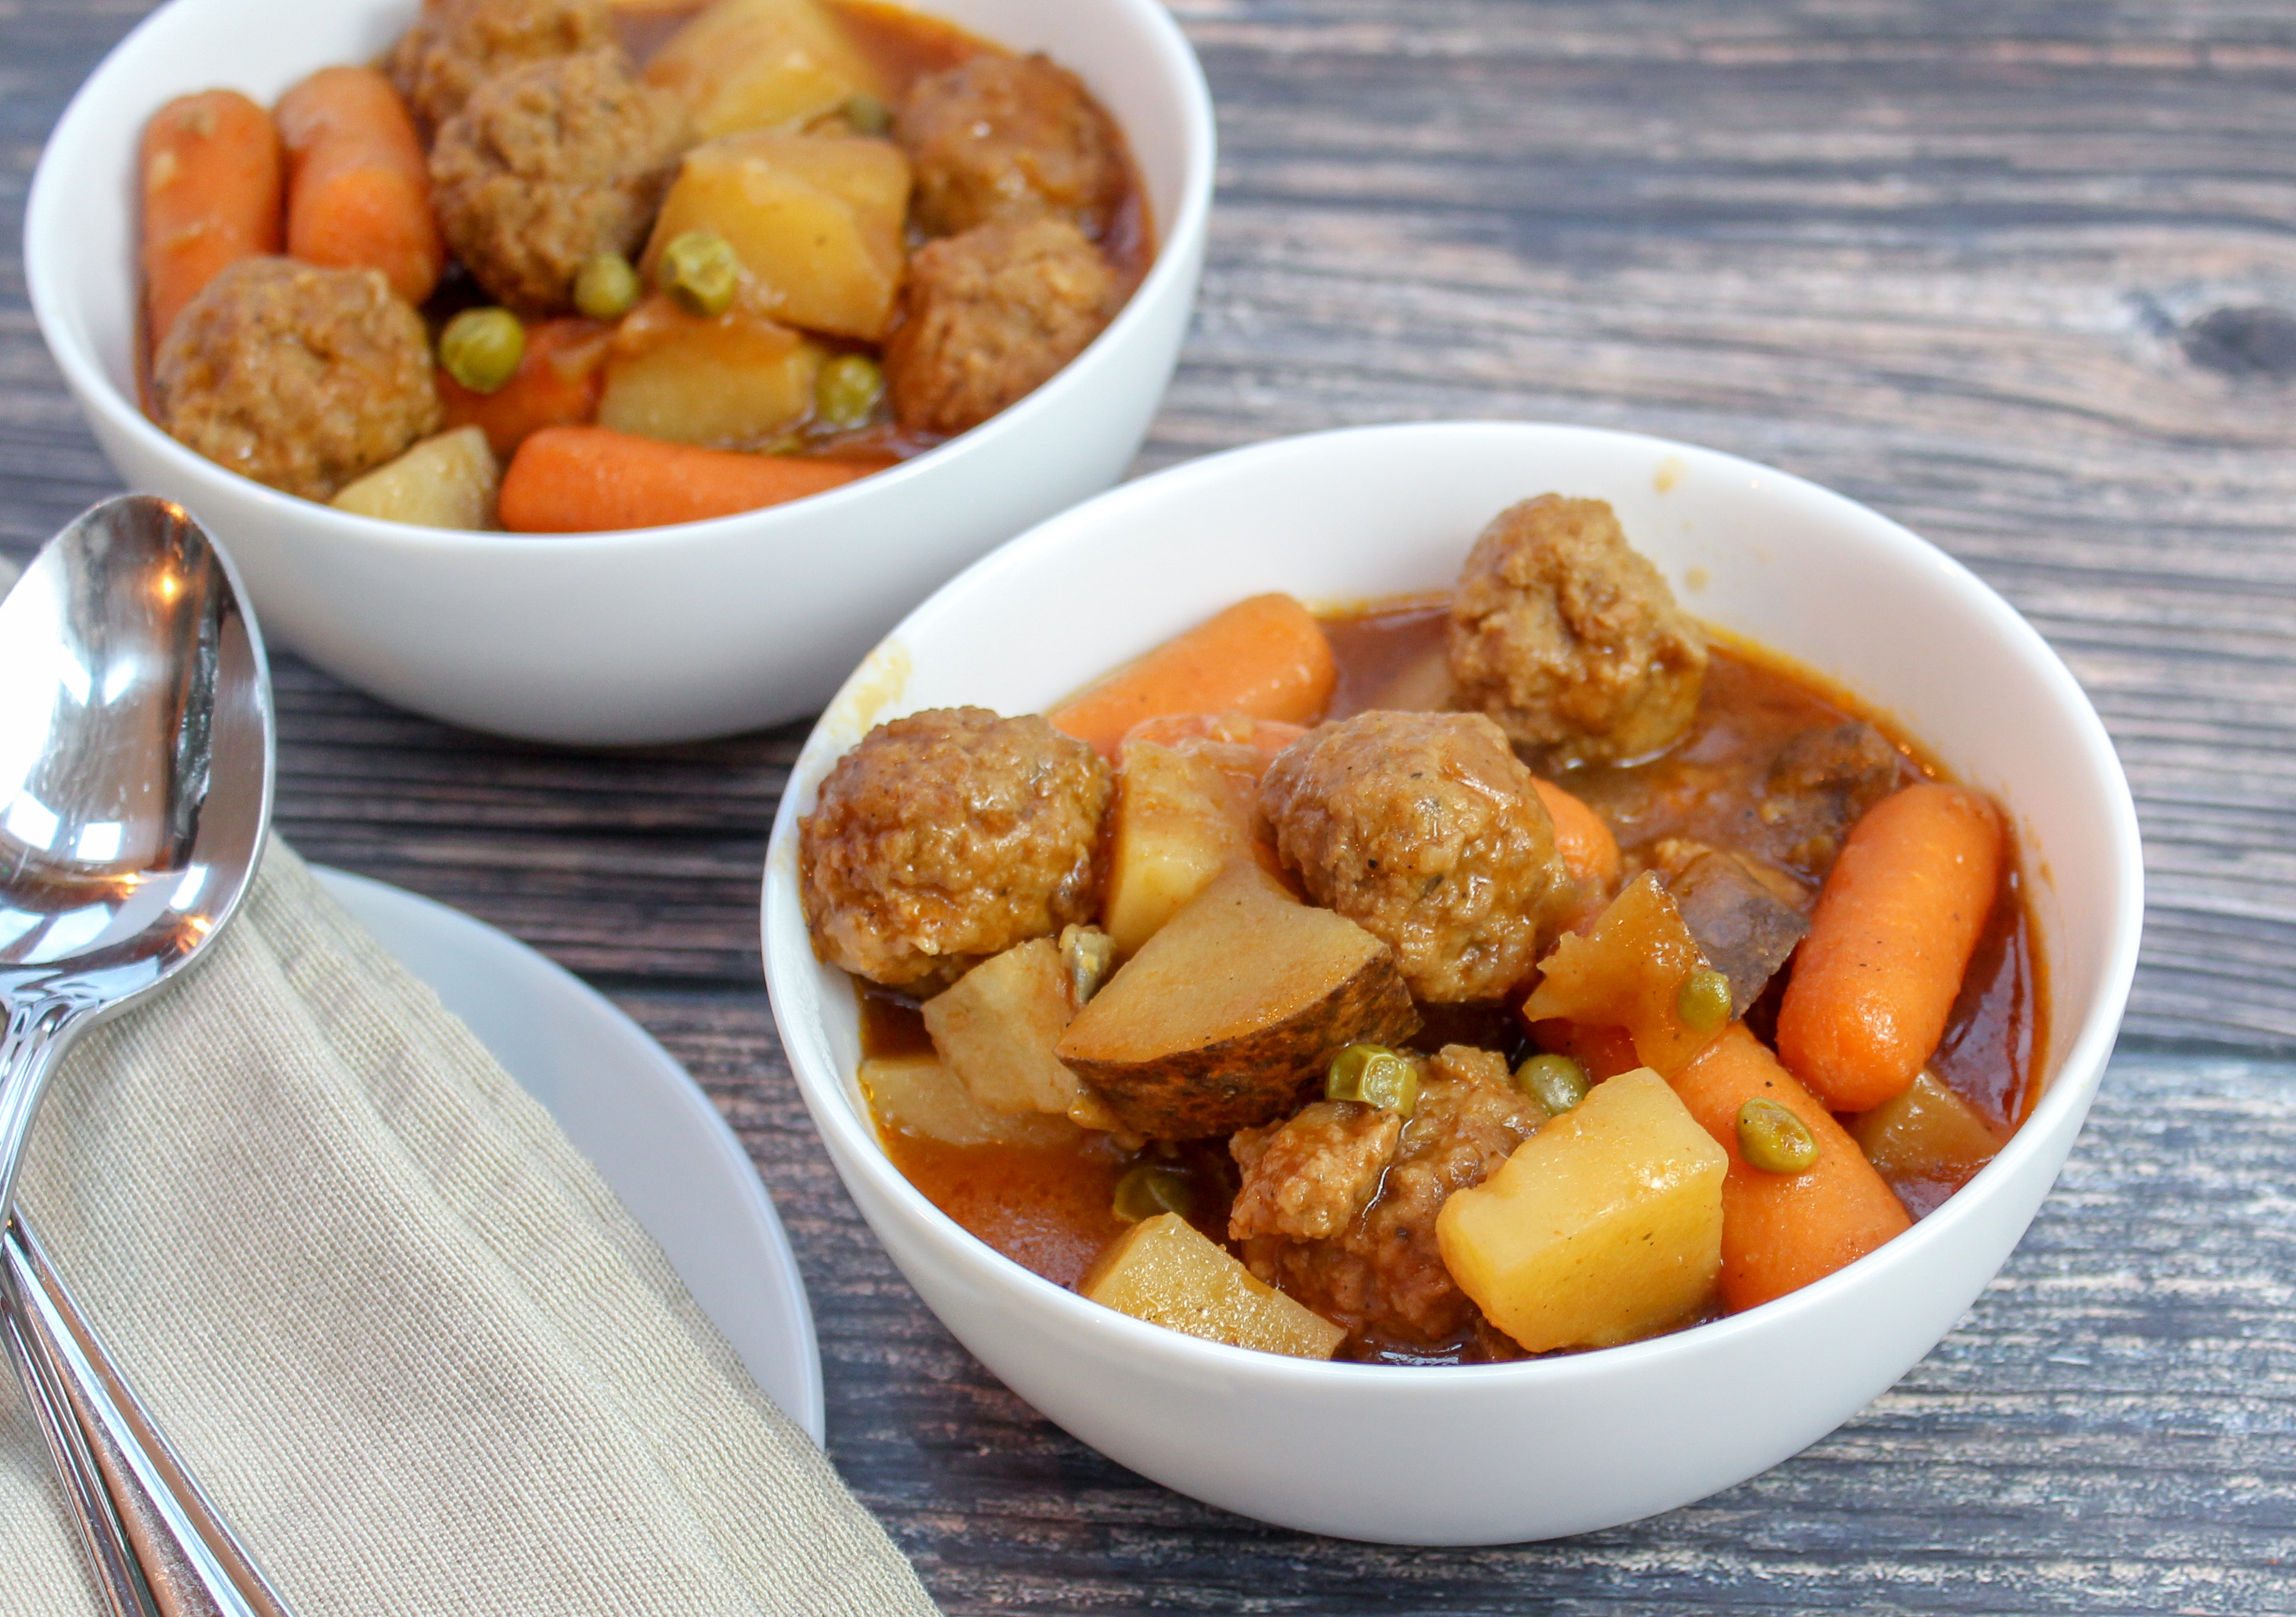 White bowl filled with meatballs, carrots, celery, potatoes and peas